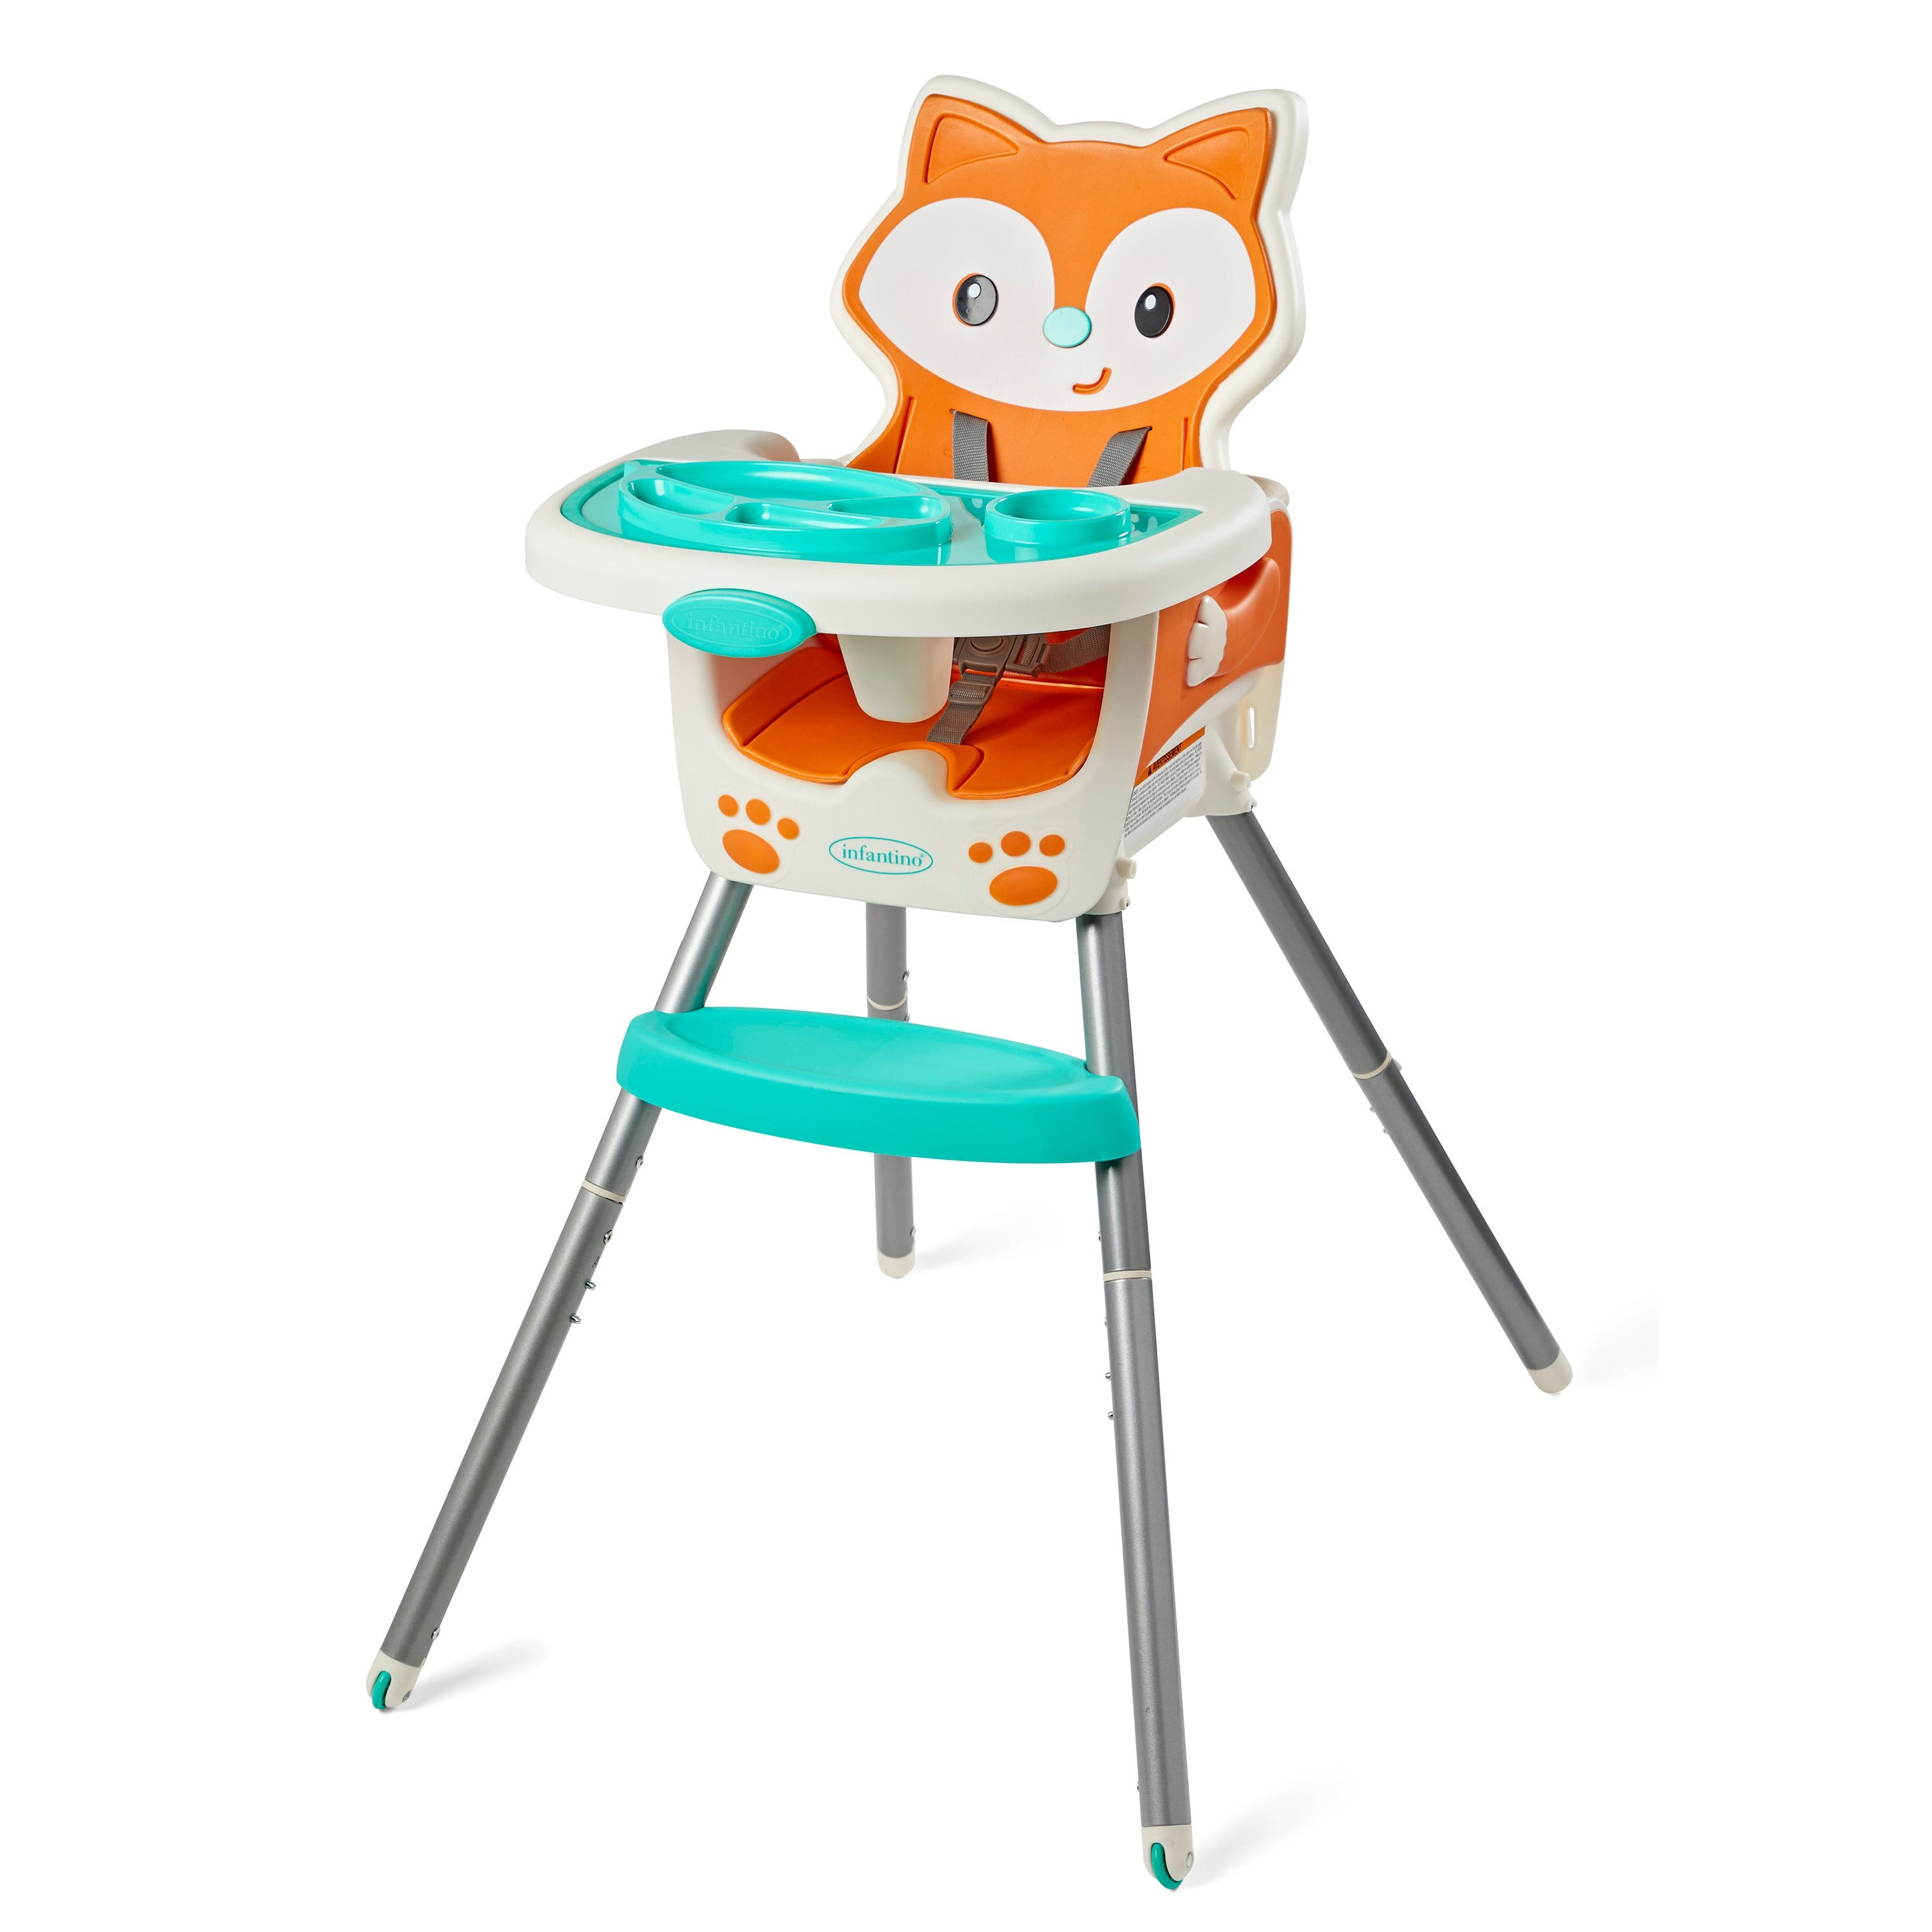 Grow-with-Me 4-in-1 Convertible High Chair